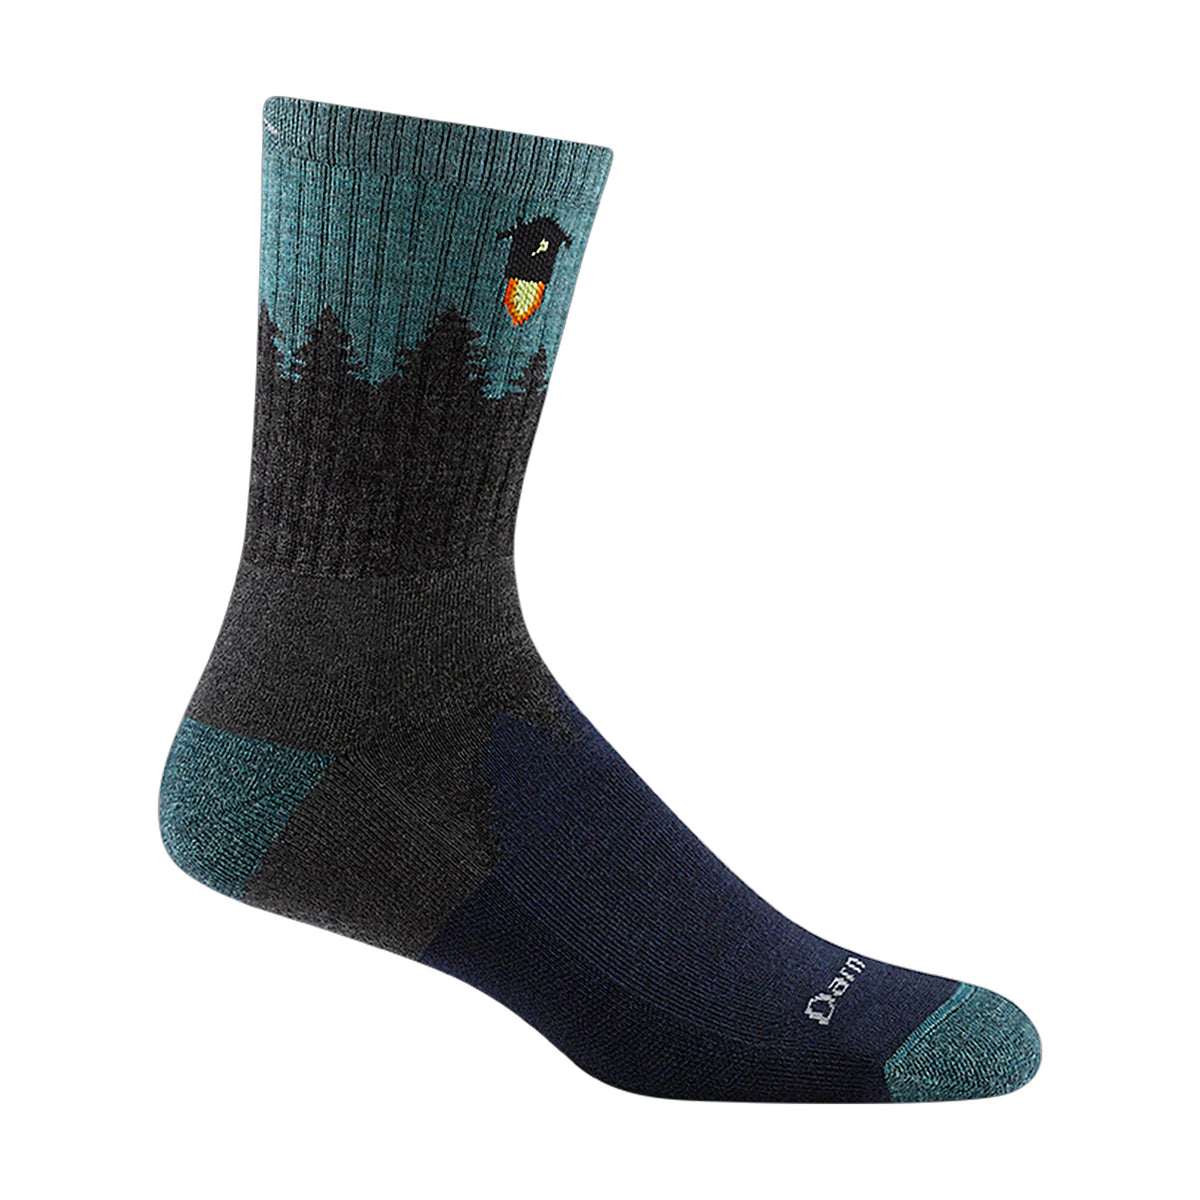 A single Darn Tough Number 2 Gray hiking sock with a stylized nature design and a small orange logo displayed against a white background.